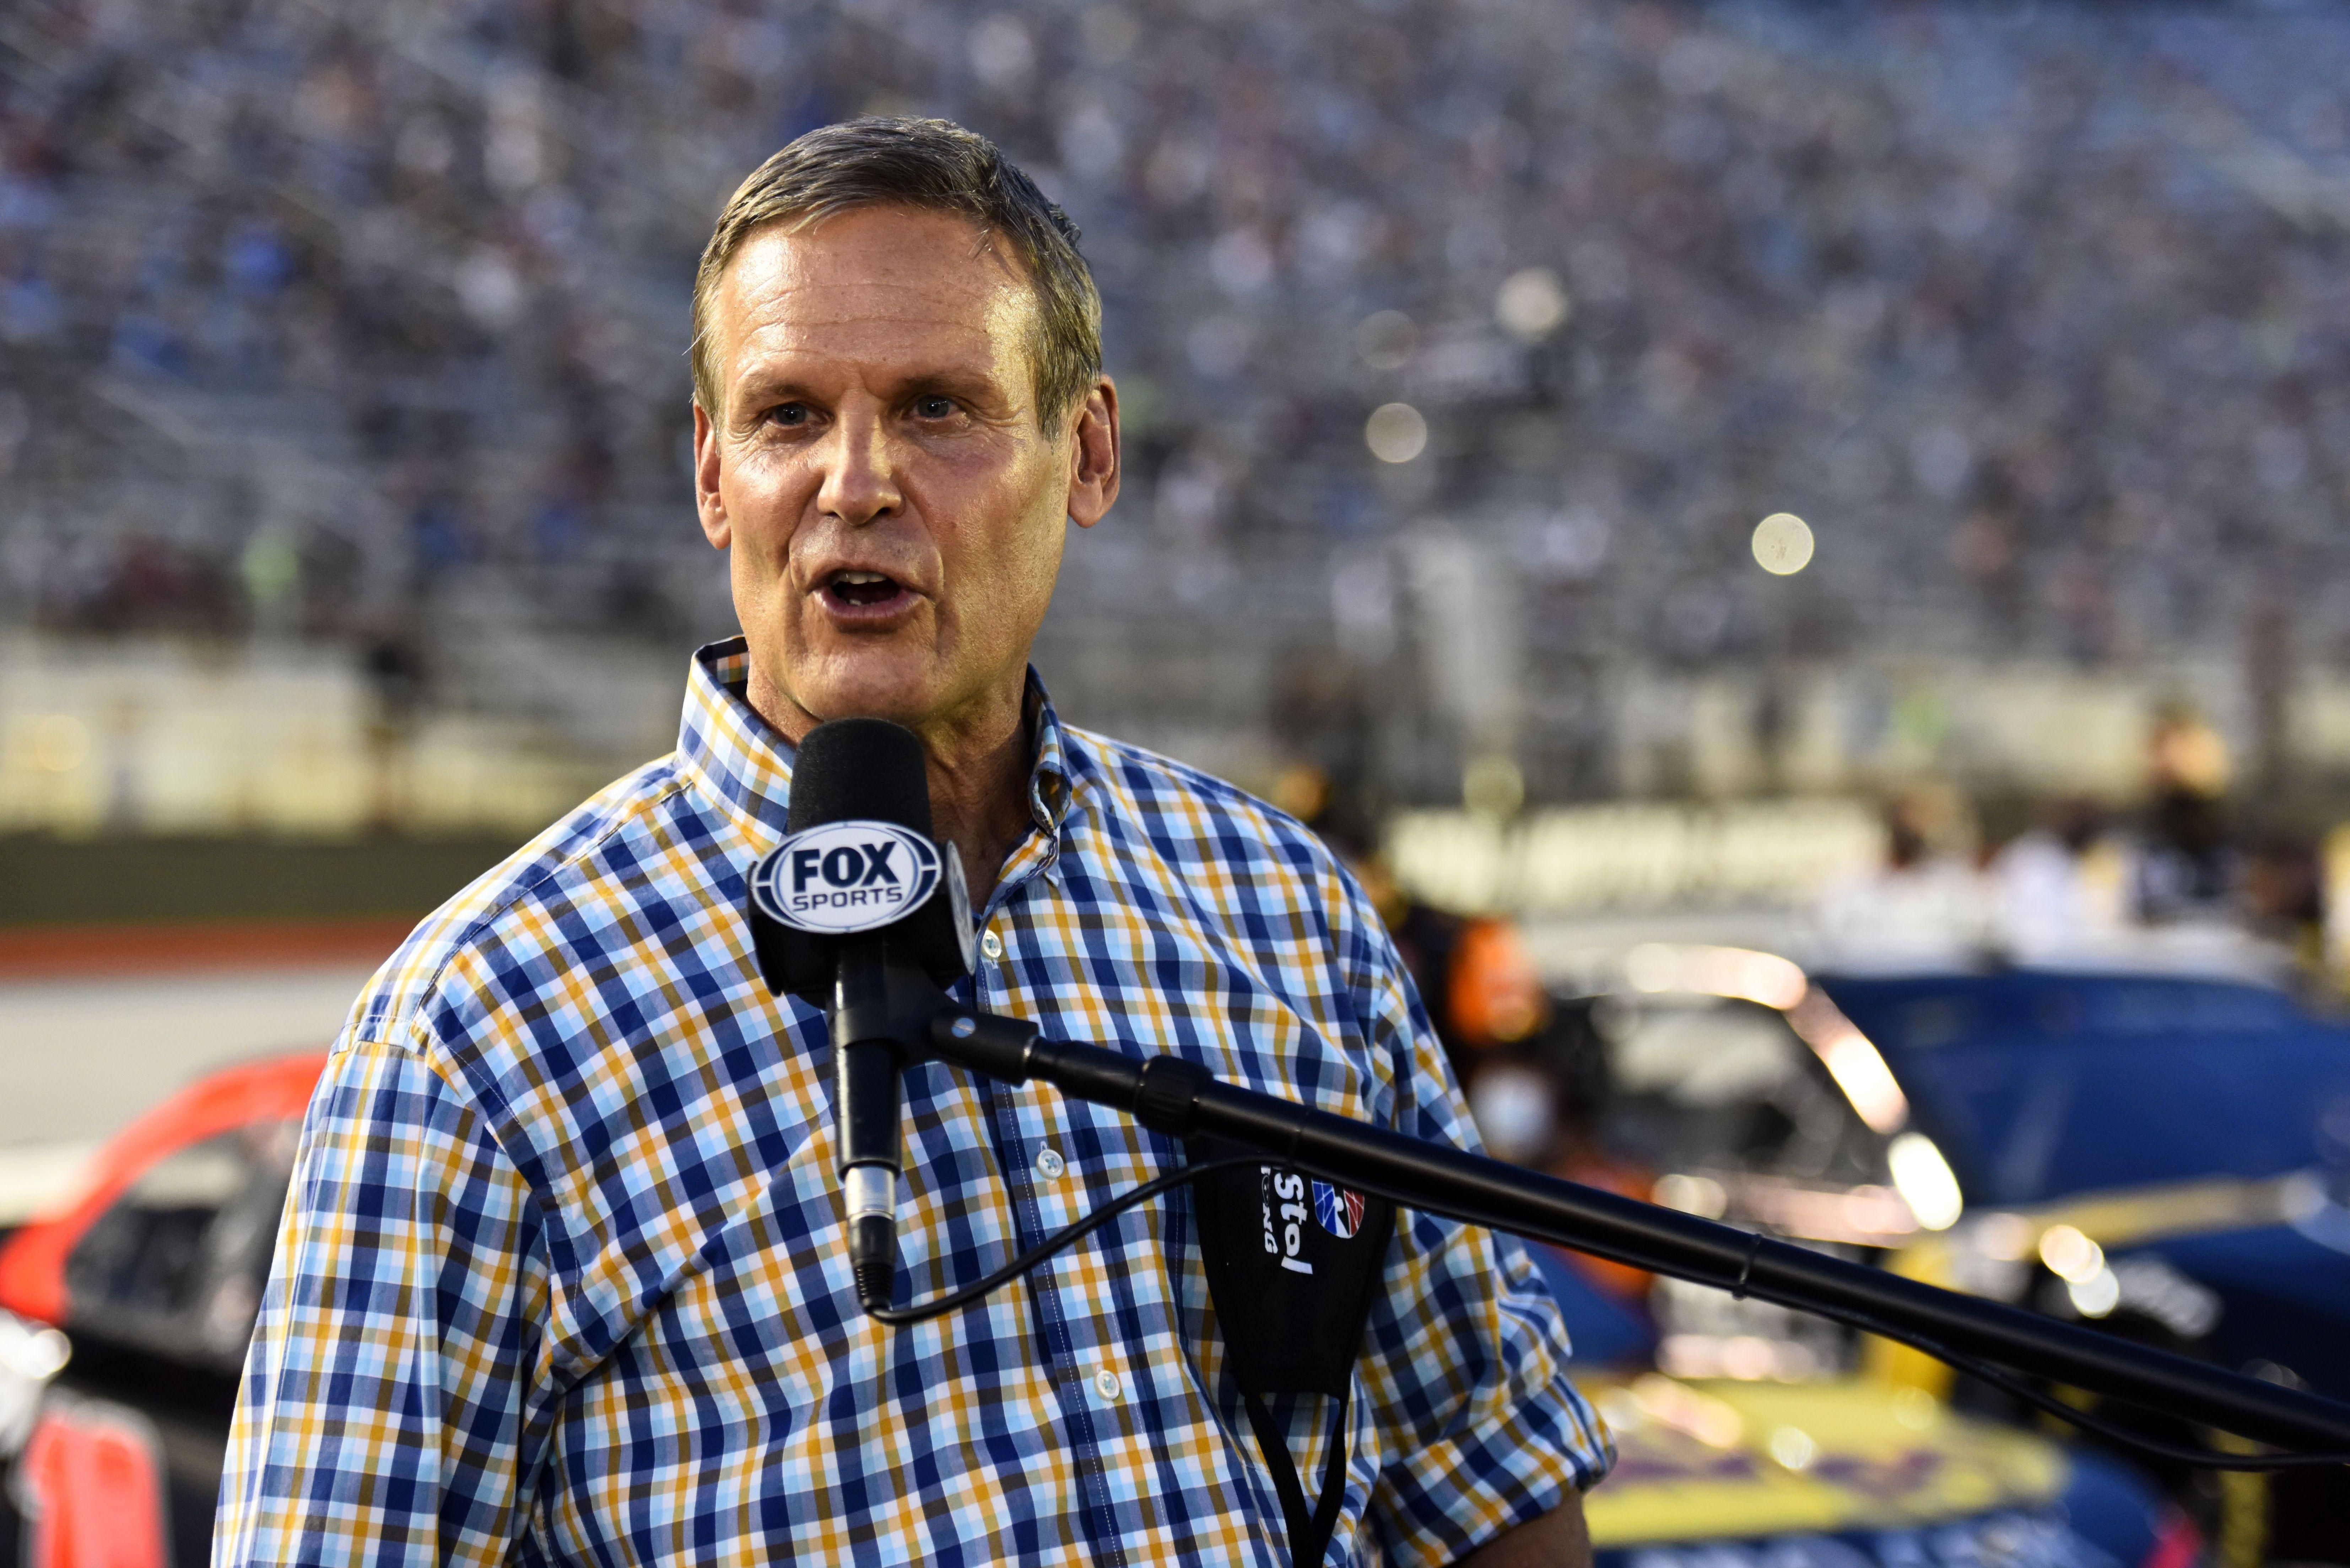 Tennessee Gov. Bill Lee (R) gives the command to start engines prior to the NASCAR Cup Series All-Star Race at Bristol Motor Speedway on July 15, 2020 in Bristol, Tennessee. 